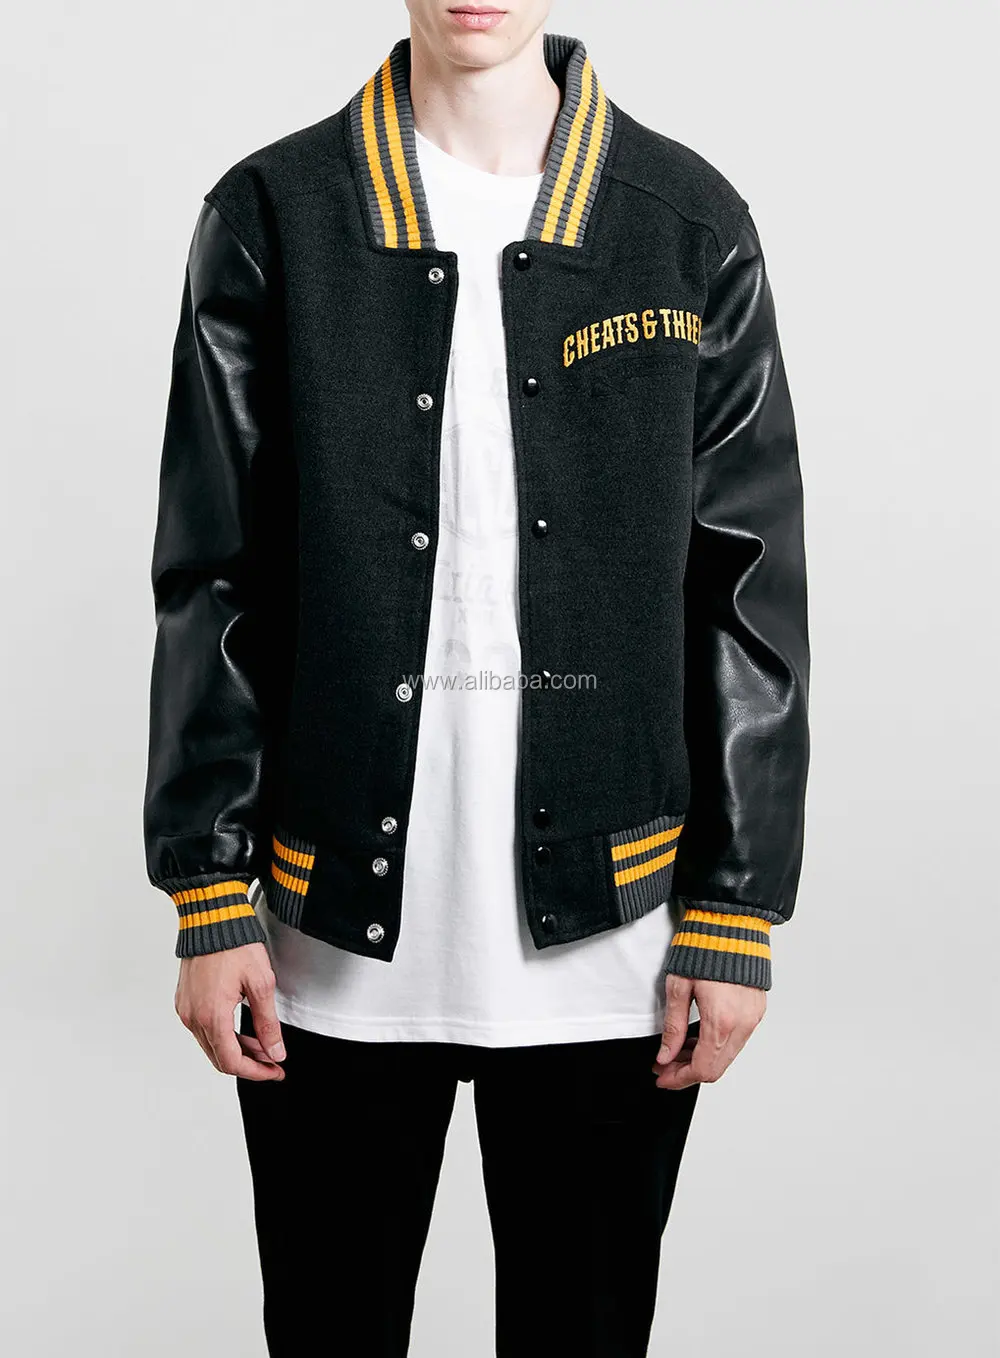 Download 2015 Latest Style College Jacket / Varsity Jacket Wool With Leather Sleeve - Buy College Style ...